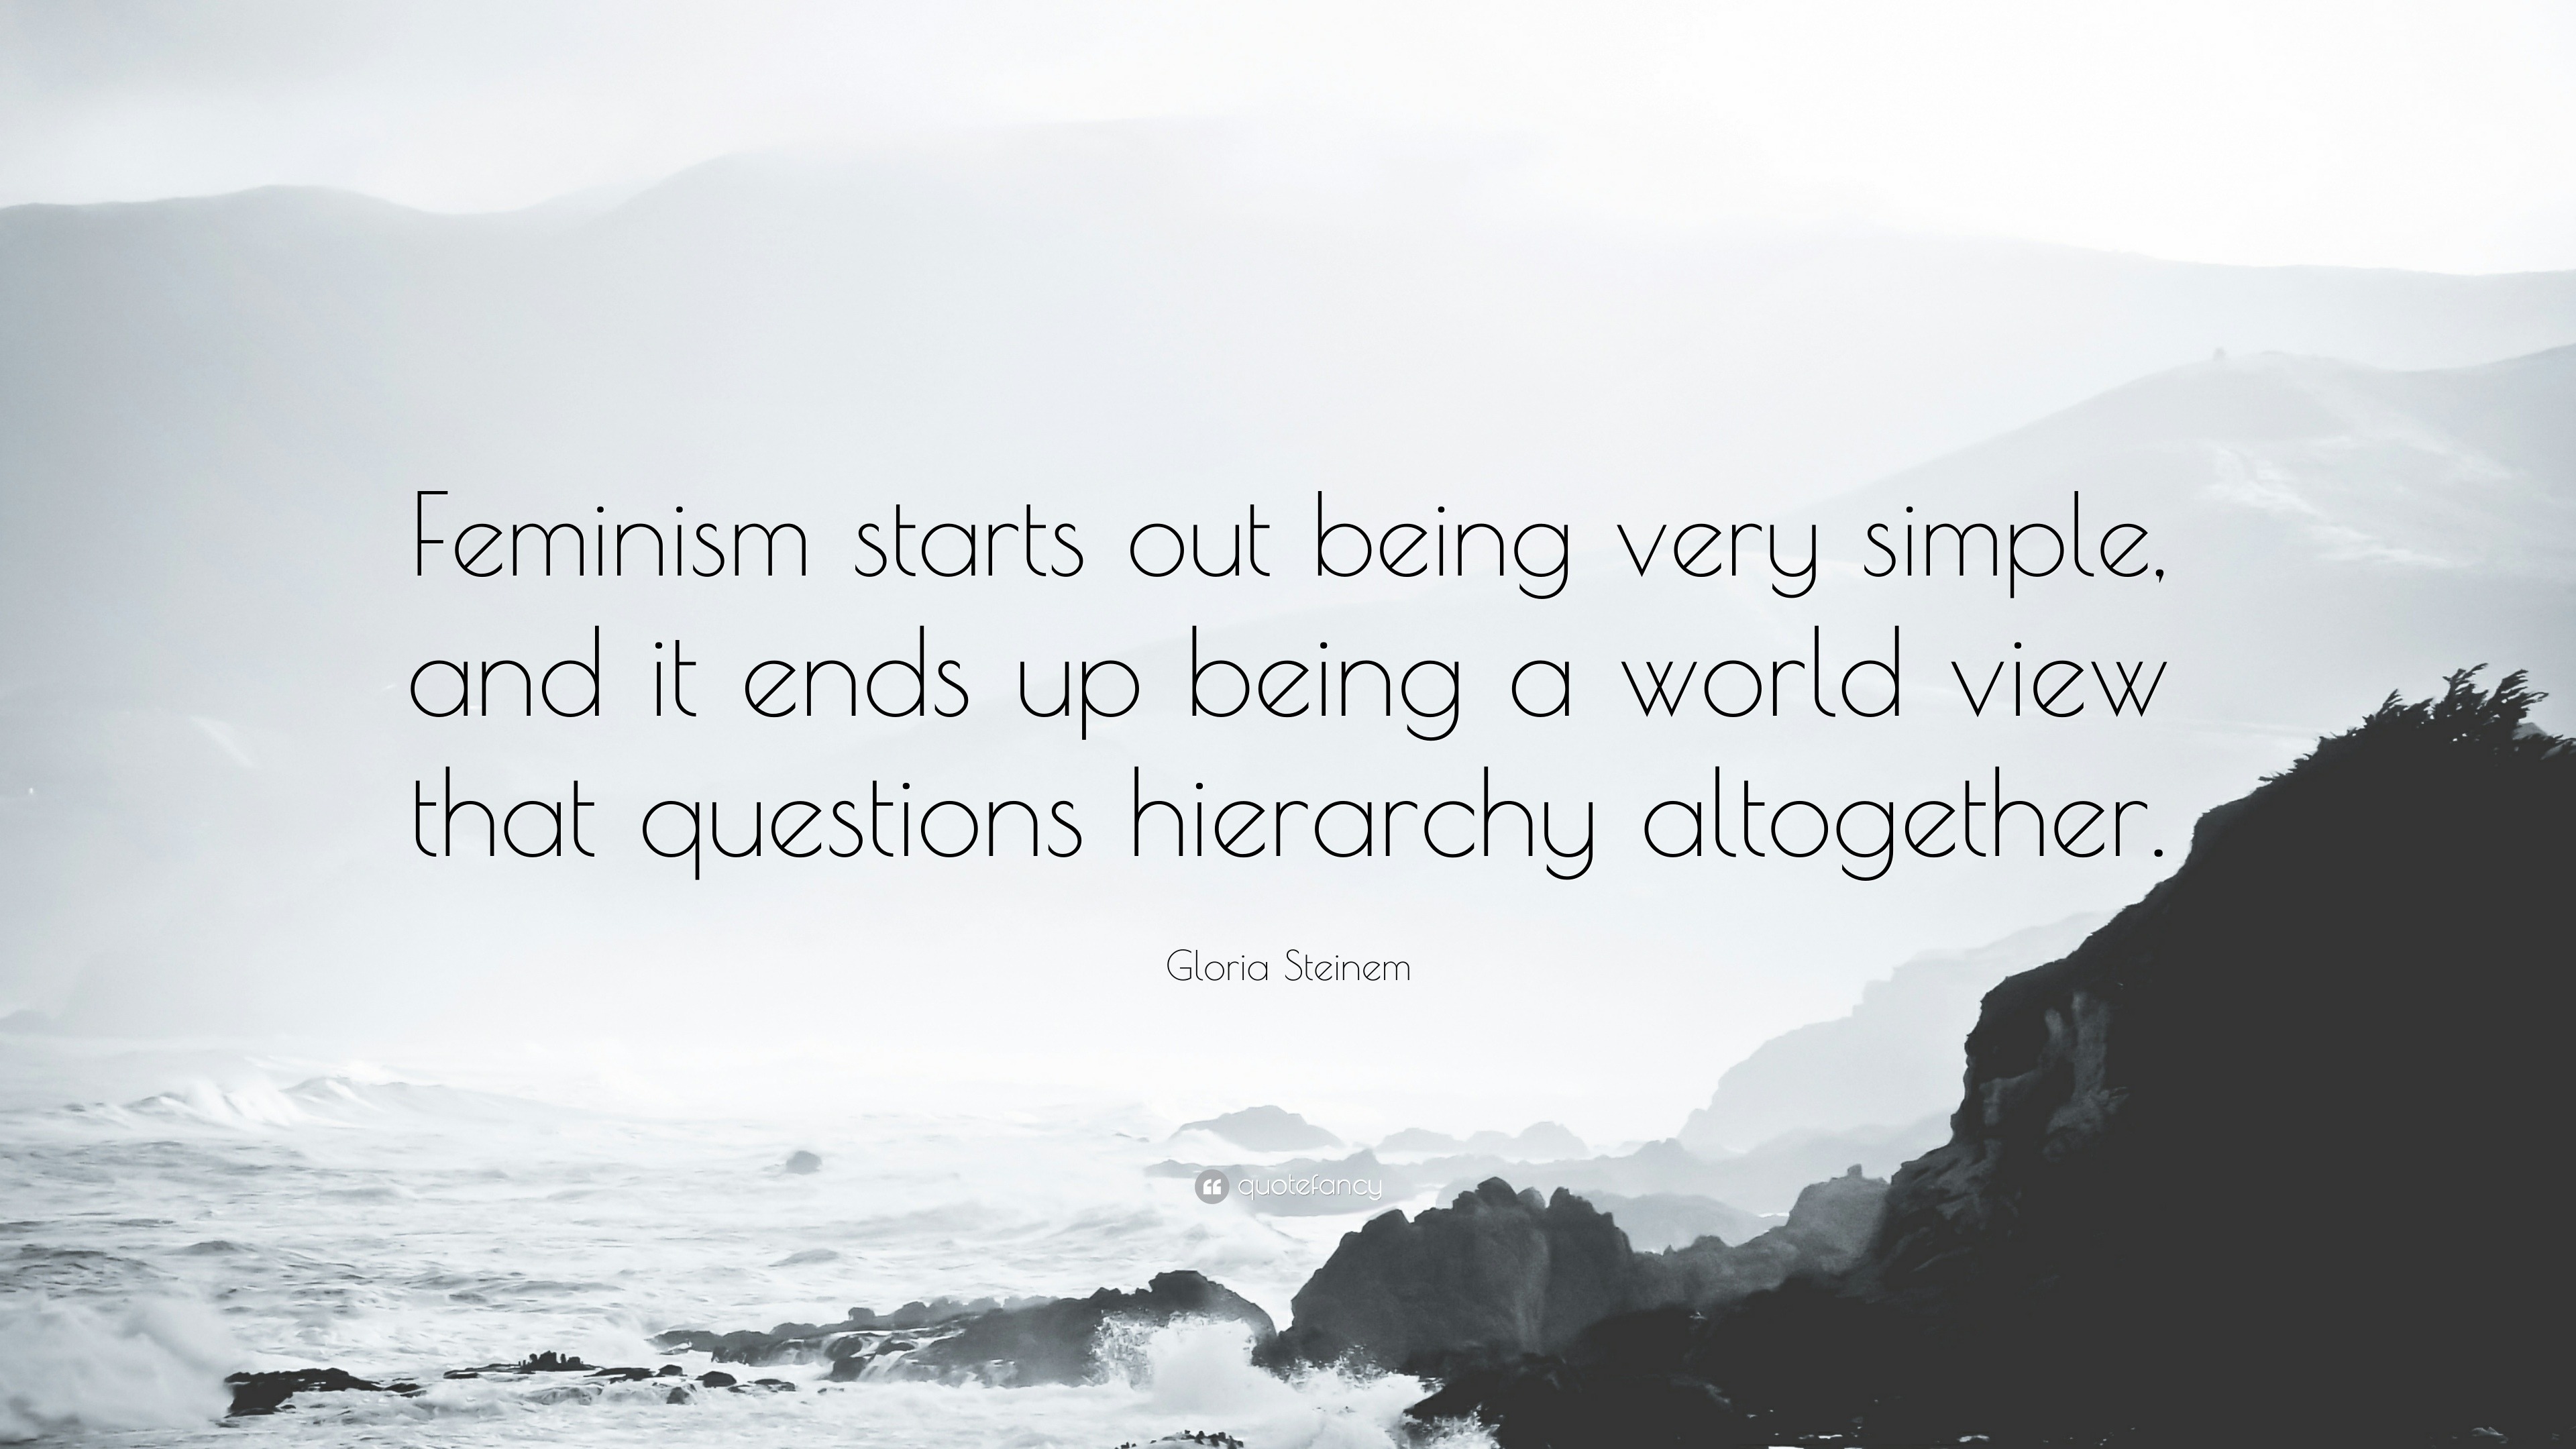 Gloria Steinem Quote “feminism Starts Out Being Very Simple And It Ends Up Being A World View